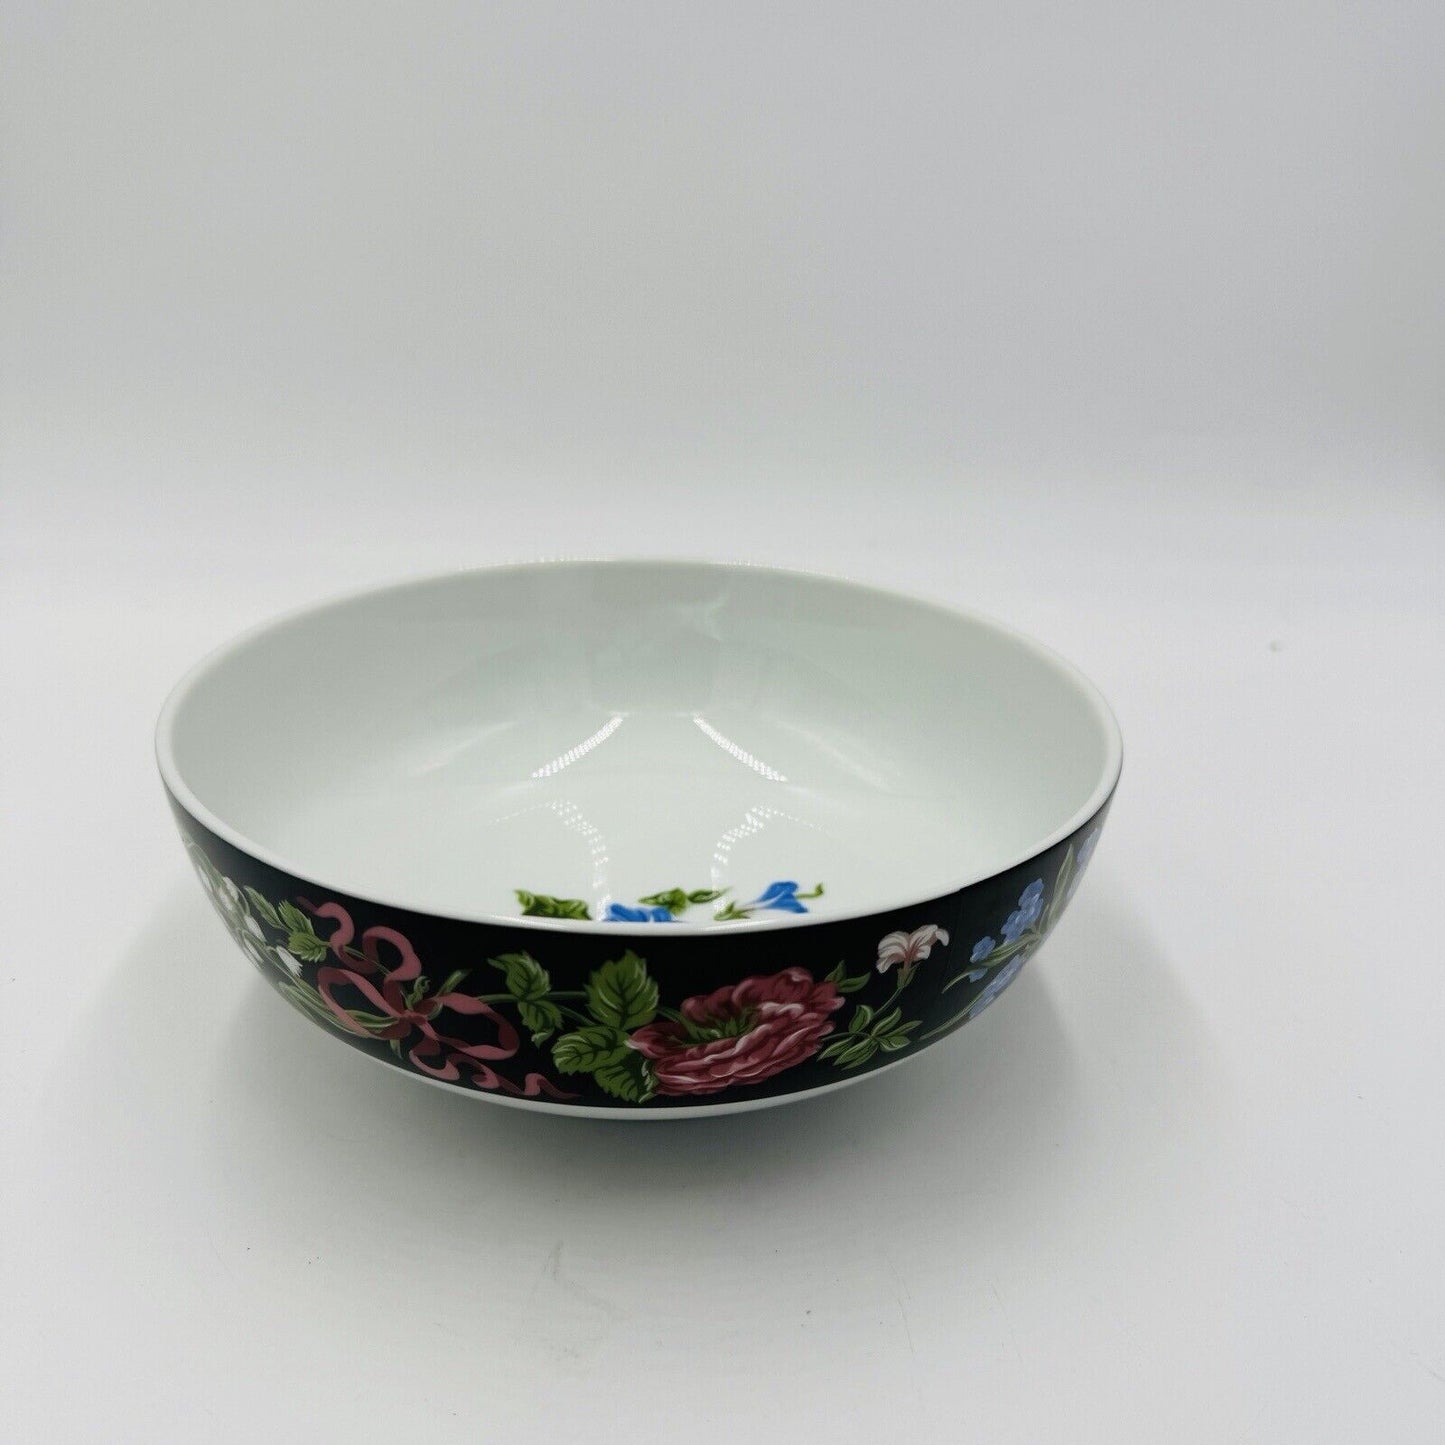 Tiffany & Co. Merrion Square by Sybil Connolly Floral Porcelain Bowl 3inH x 8inW